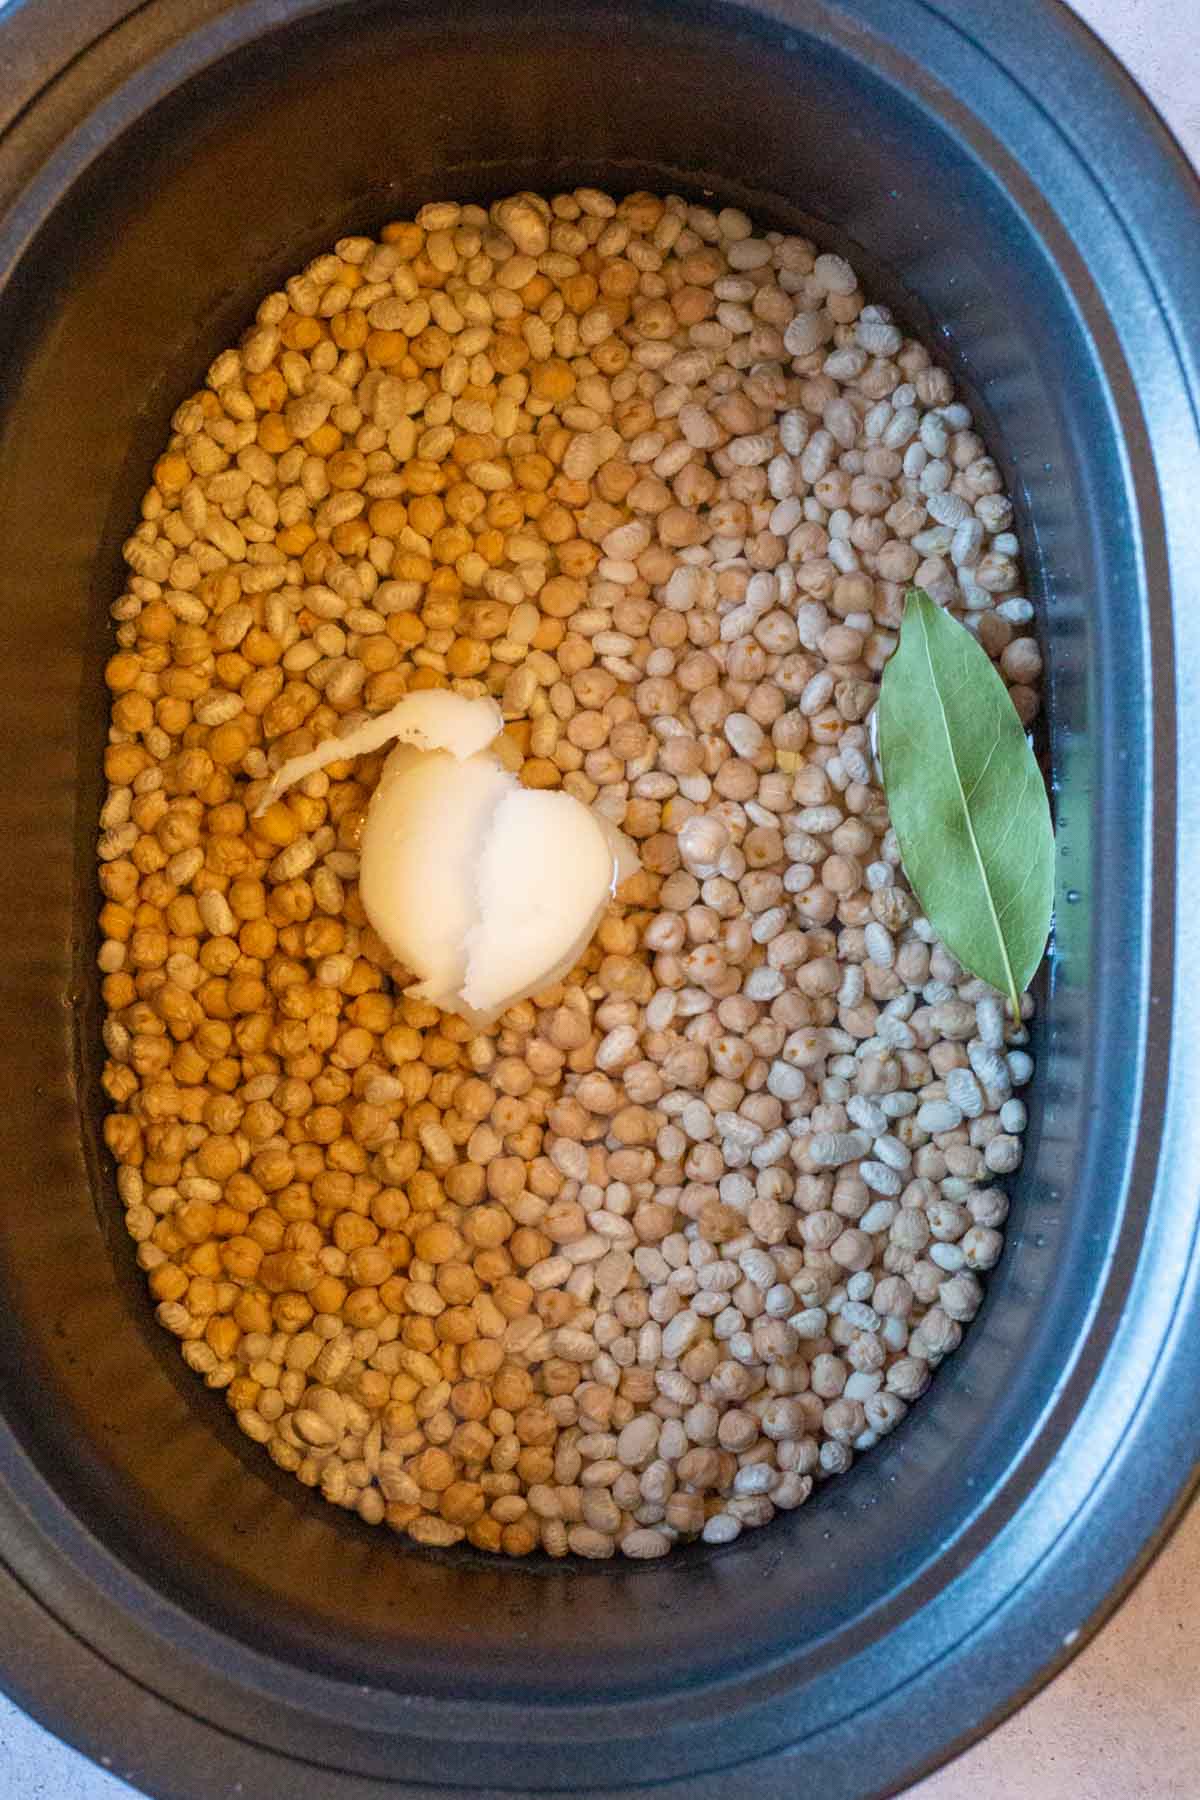 Cooking dried chickpeas and navy beans in a crockpot.